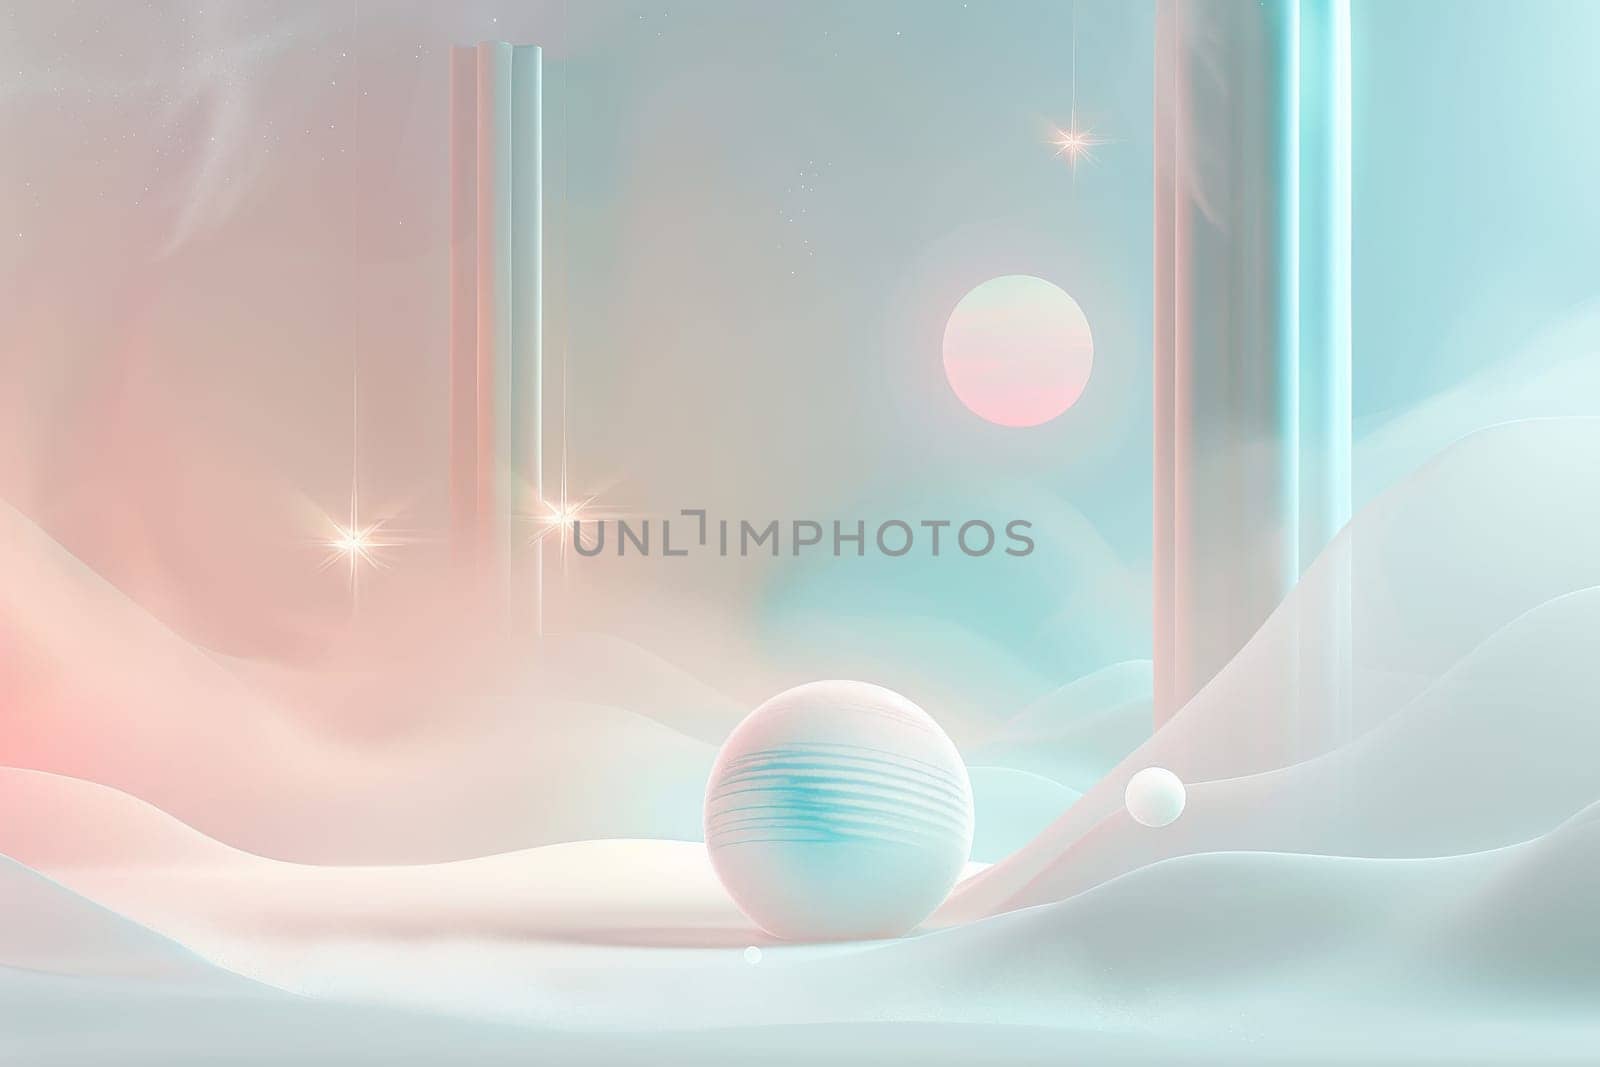 A white ball is on a snowy surface in a space with a pink and blue background. The ball is surrounded by other balls, and the sky is filled with stars. The scene has a dreamy, ethereal quality to it